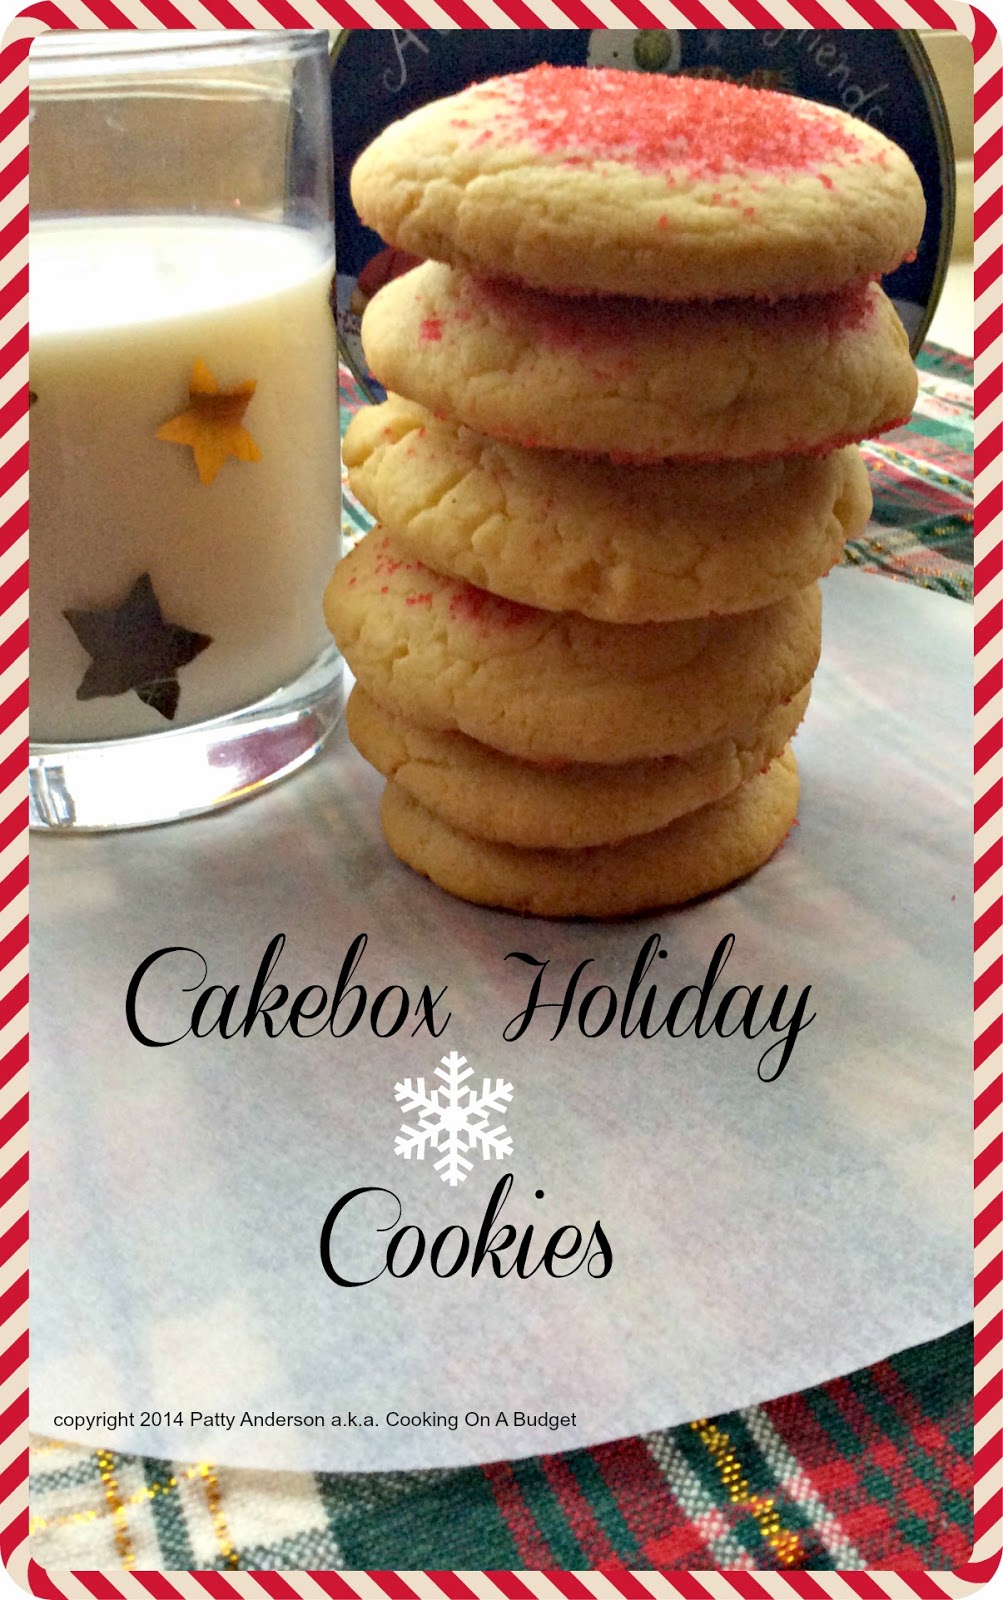 Cooking On A Budget: Cake Box Holiday Cookies